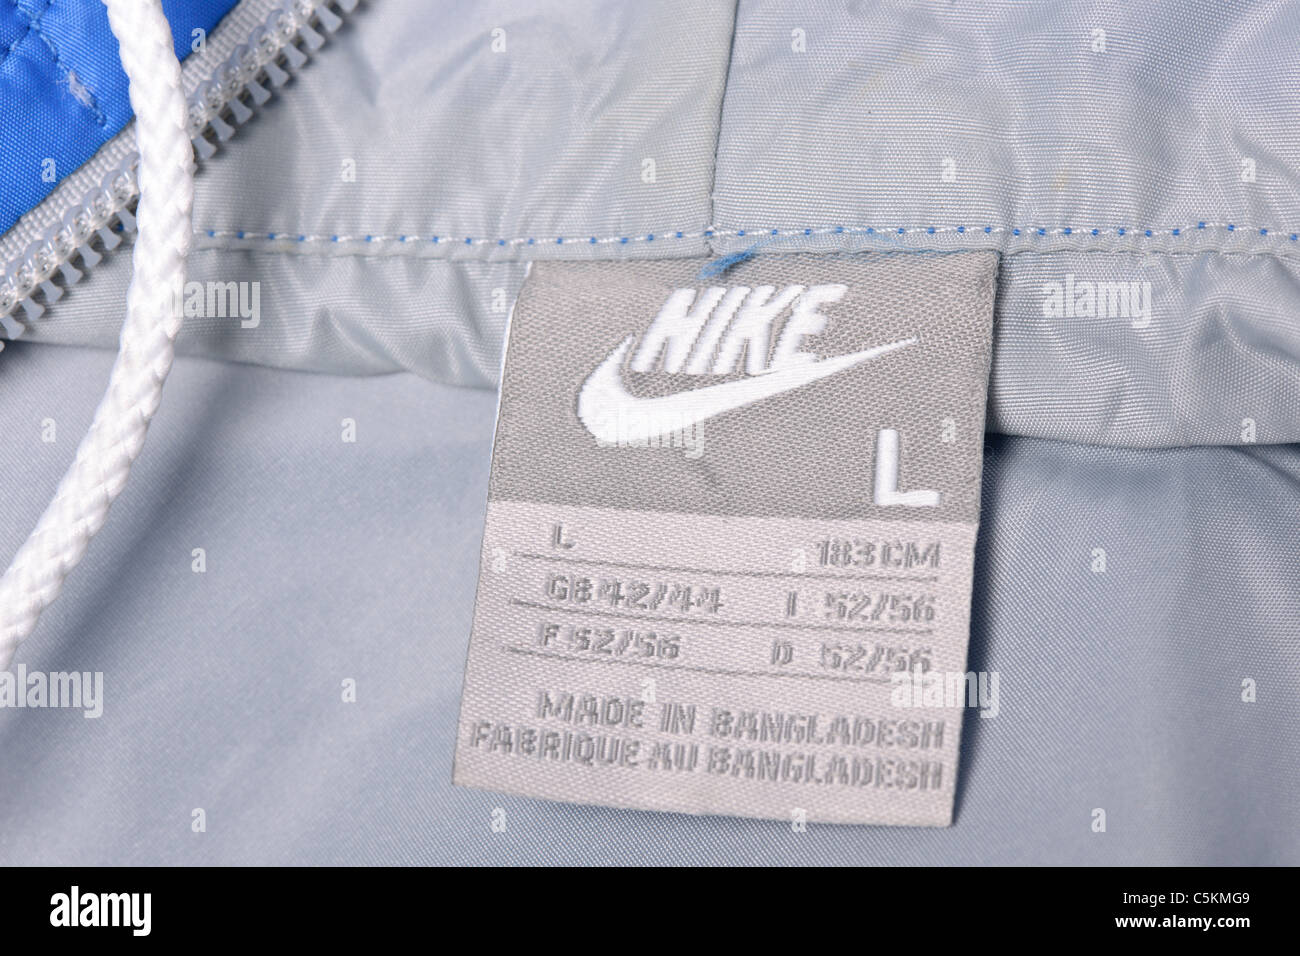 Men's Nike Windrunner jacket in blue/grey clothing wash care label detail  Stock Photo - Alamy